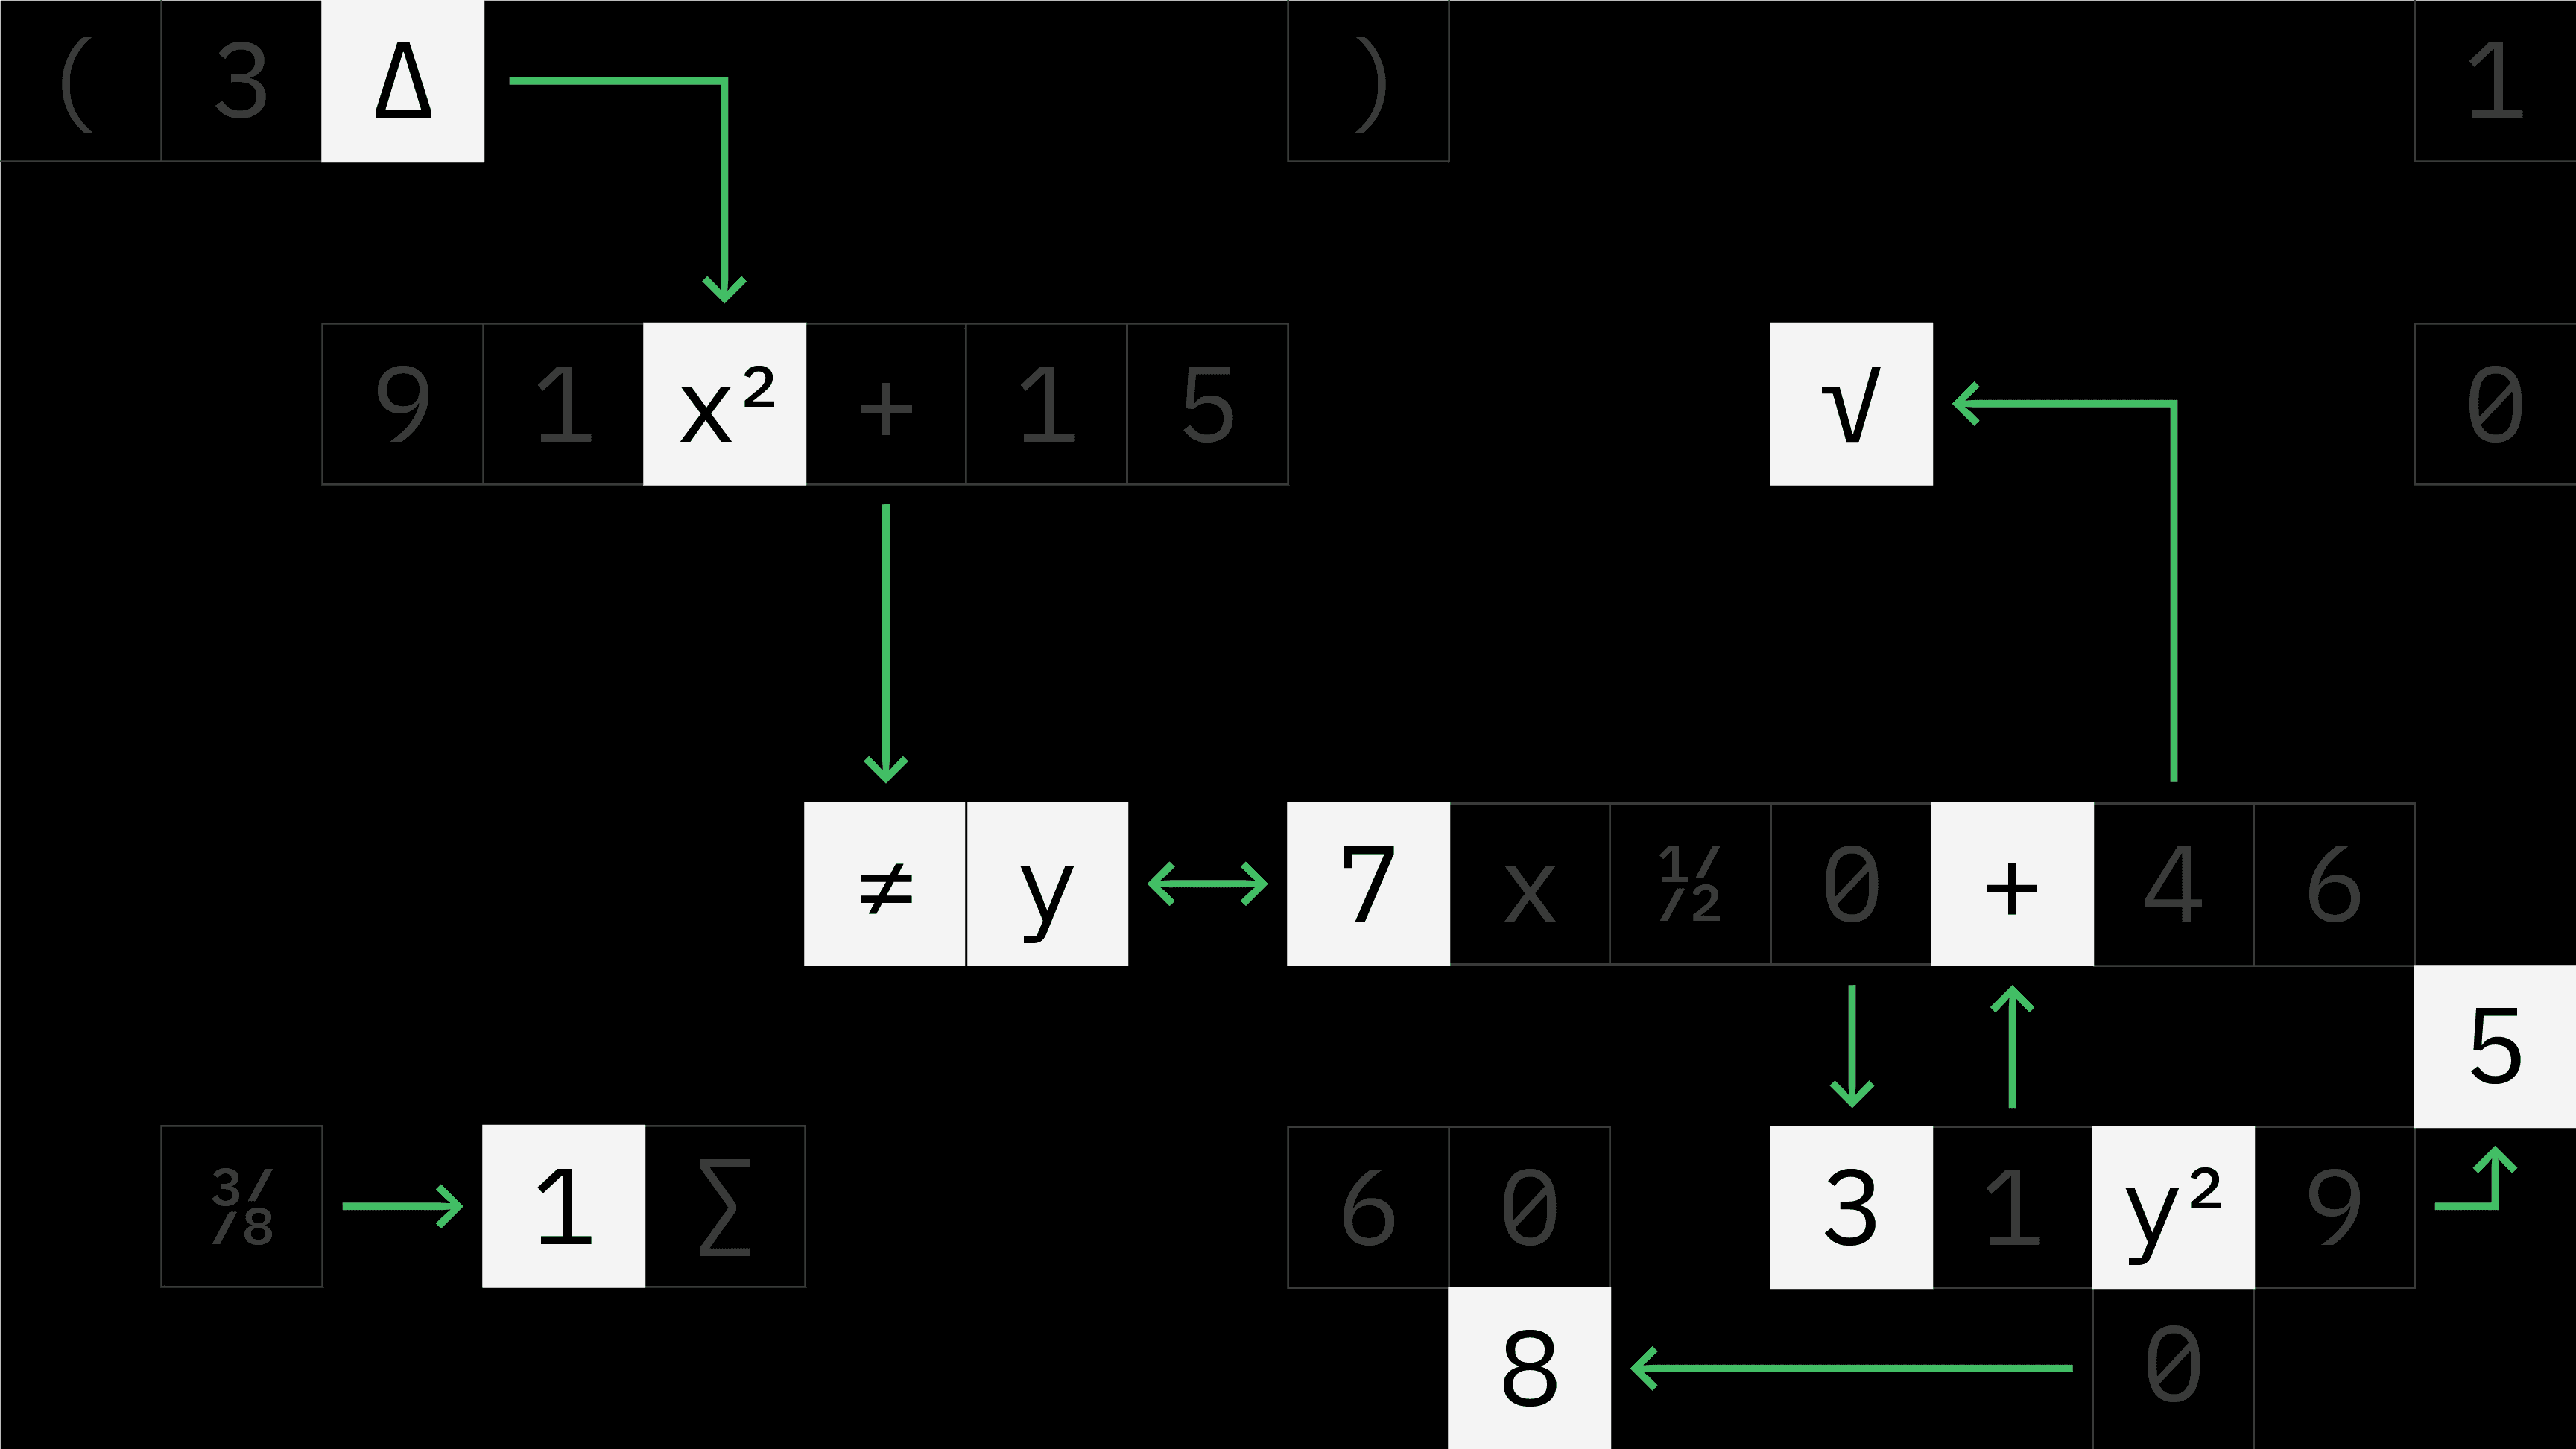 Mathematical constants and variables in white boxes float on a black background, connected with green arrows